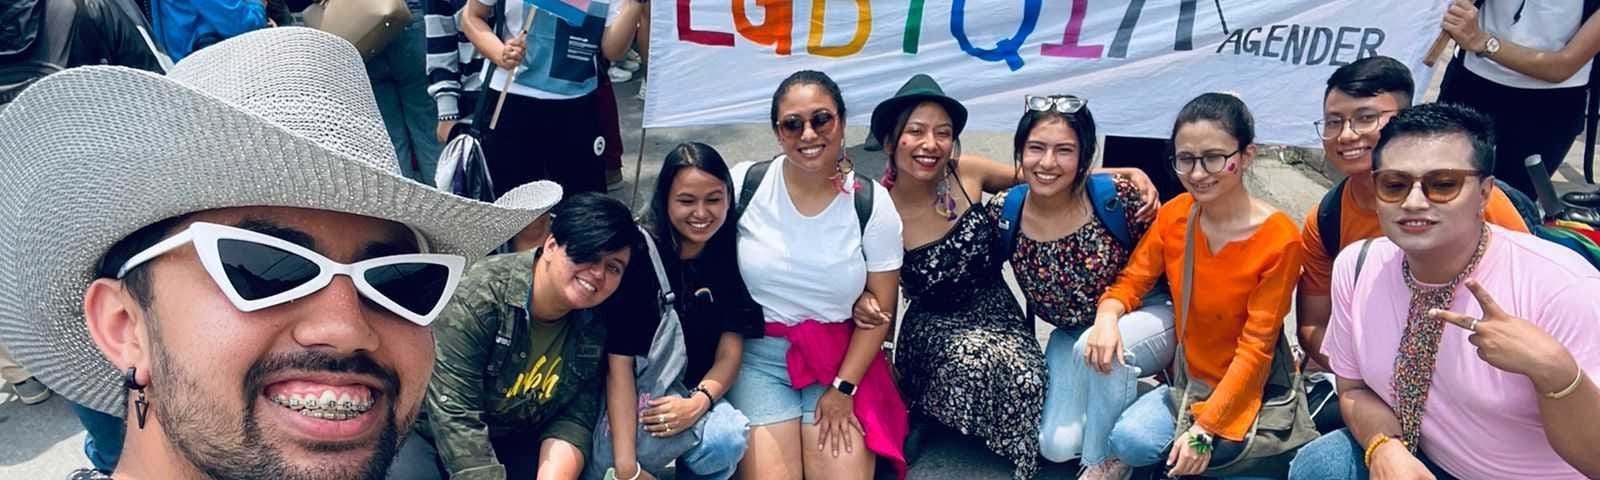 A picture of a number of people at the parade including my colleagues in front of a flag that says LGBTQIA where A stands for Asexual, Aromantic, and Agender.